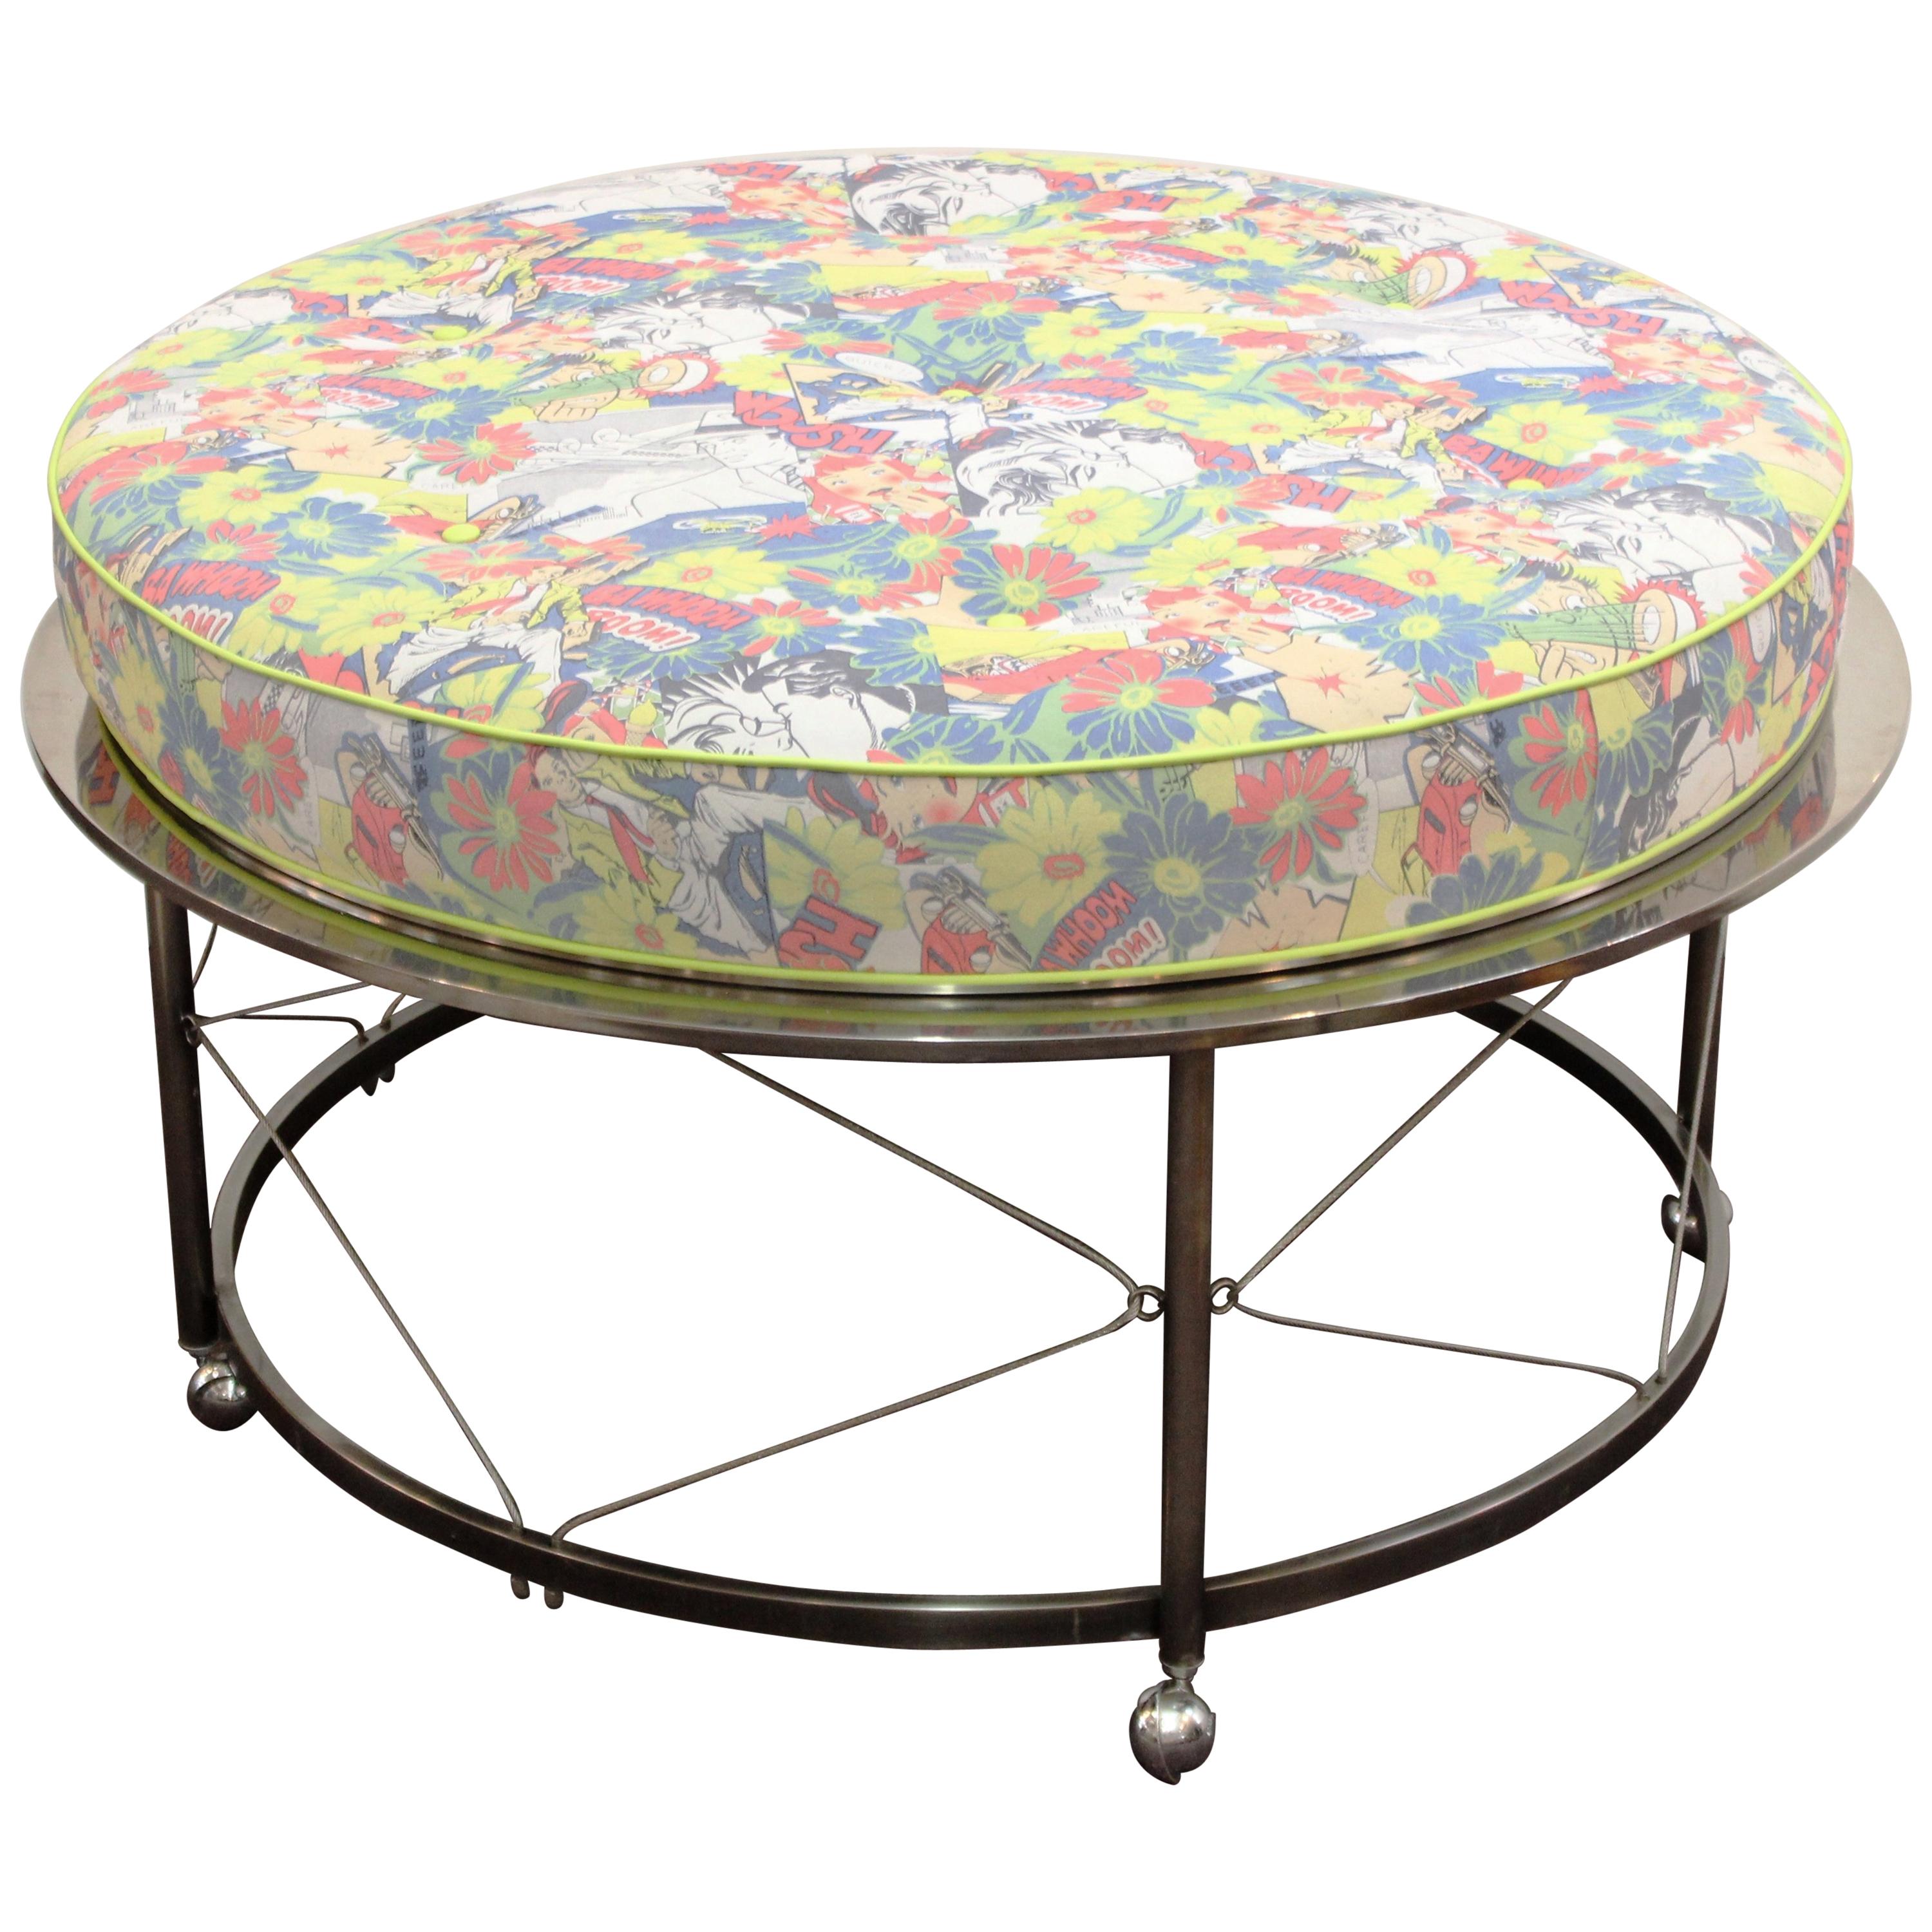 Midcentury Ottoman with Chrome Frame and Pop-Art Style Upholstery